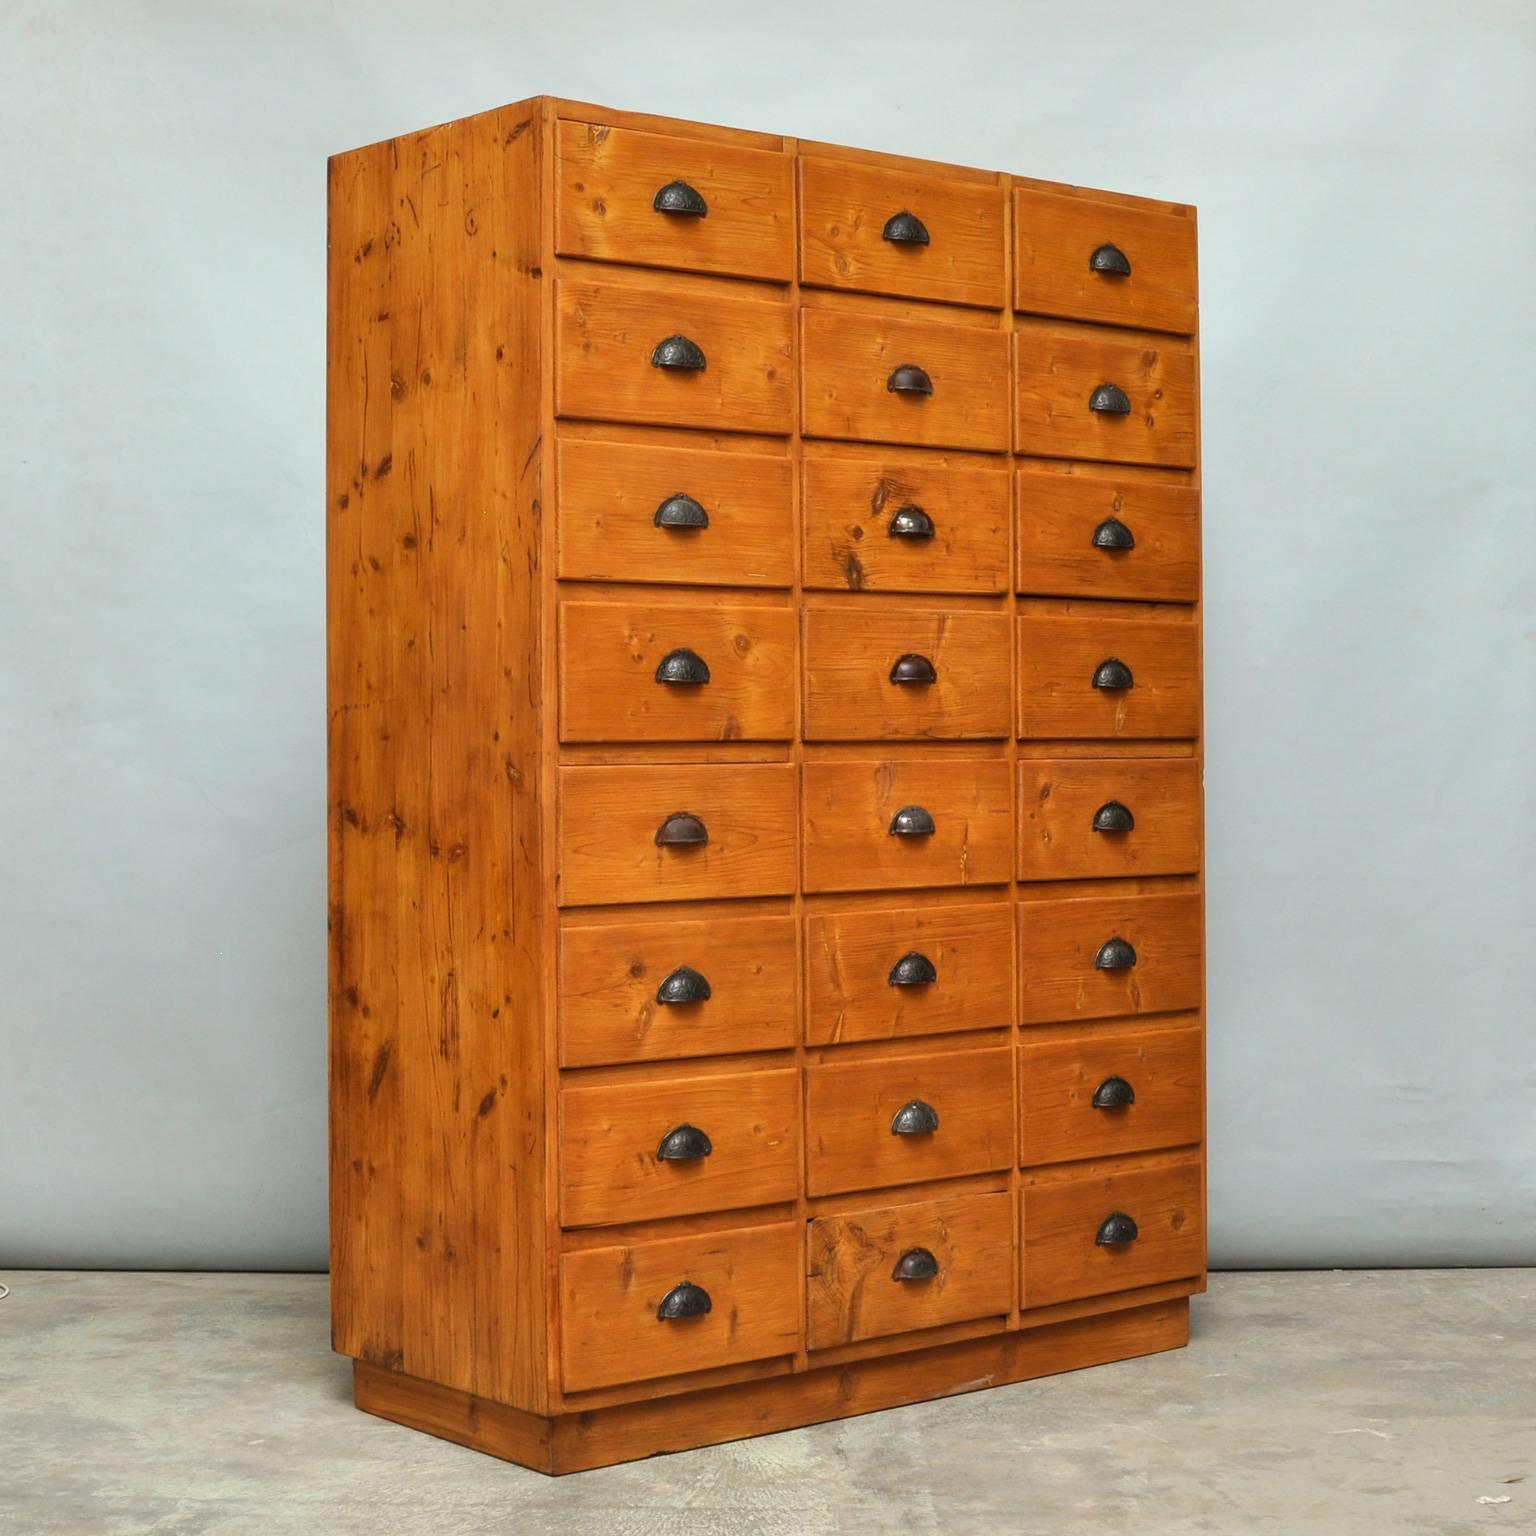 This vintage chest of drawers originates from Germany. It is made from pine and features 24 drawers. The drawers open and shut smoothly.